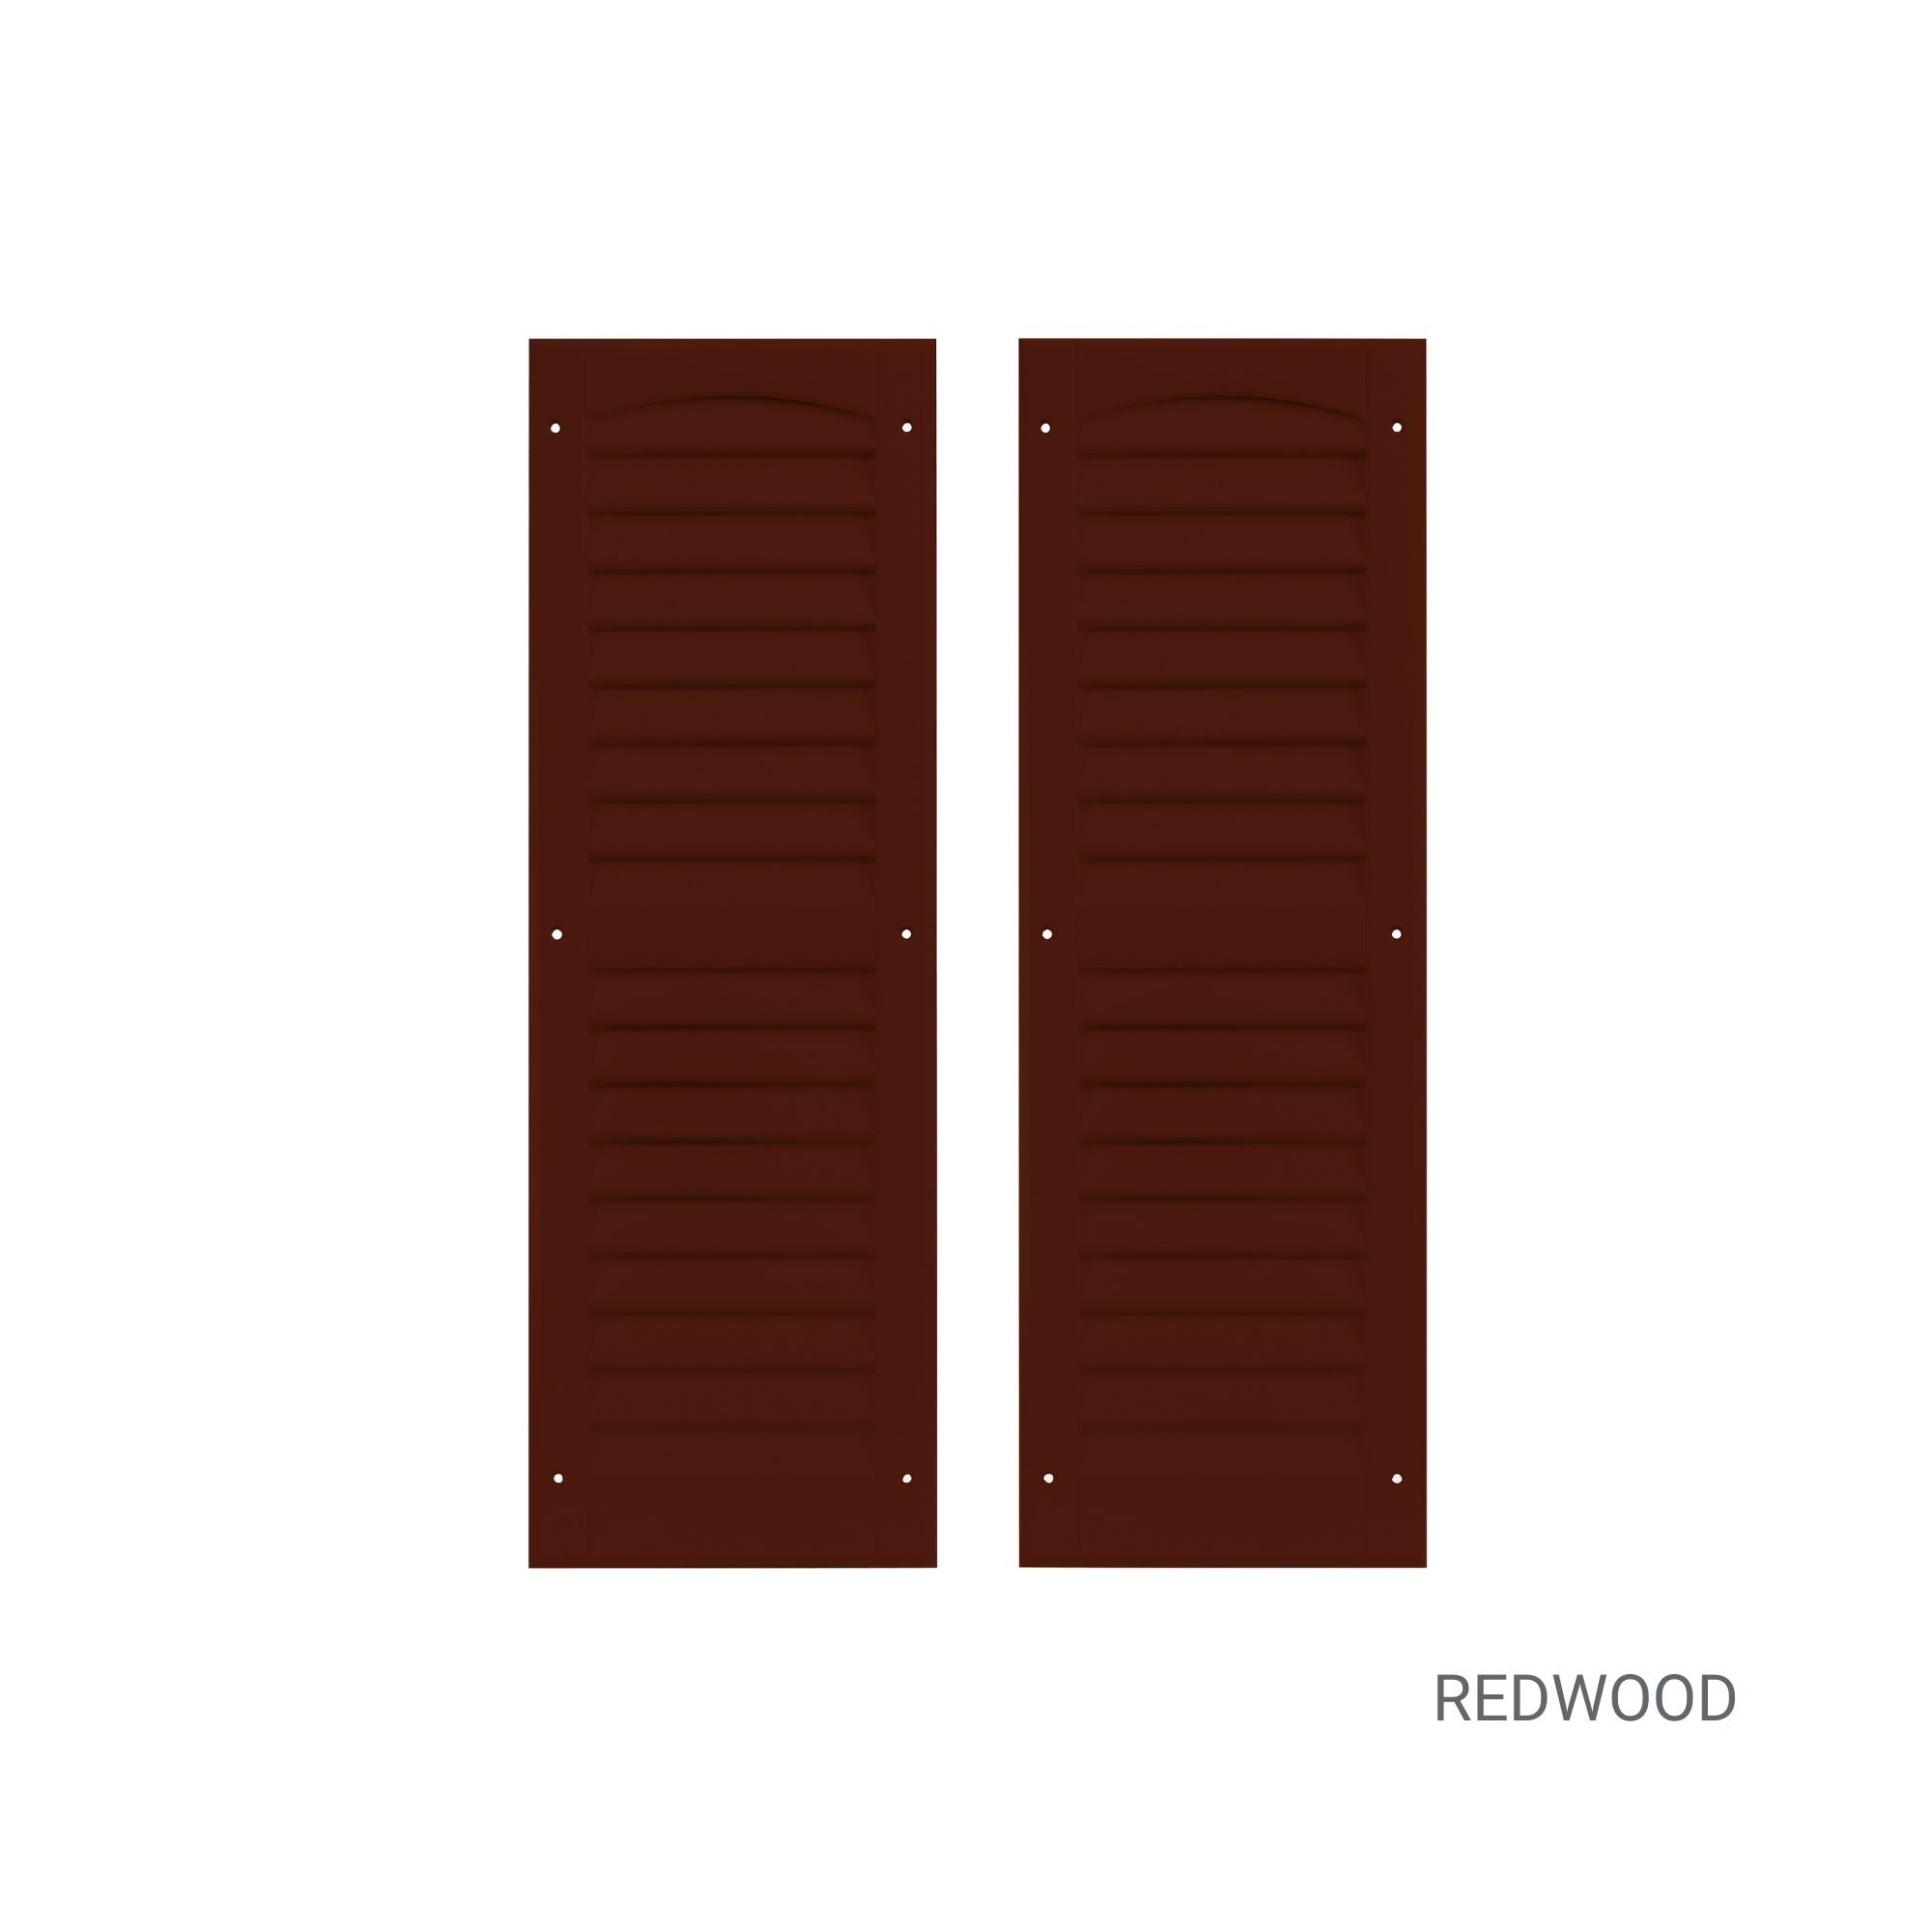 Pair of 9" W x 27" H Louvered Redwood Shutters for Sheds, Playhouses, and MORE